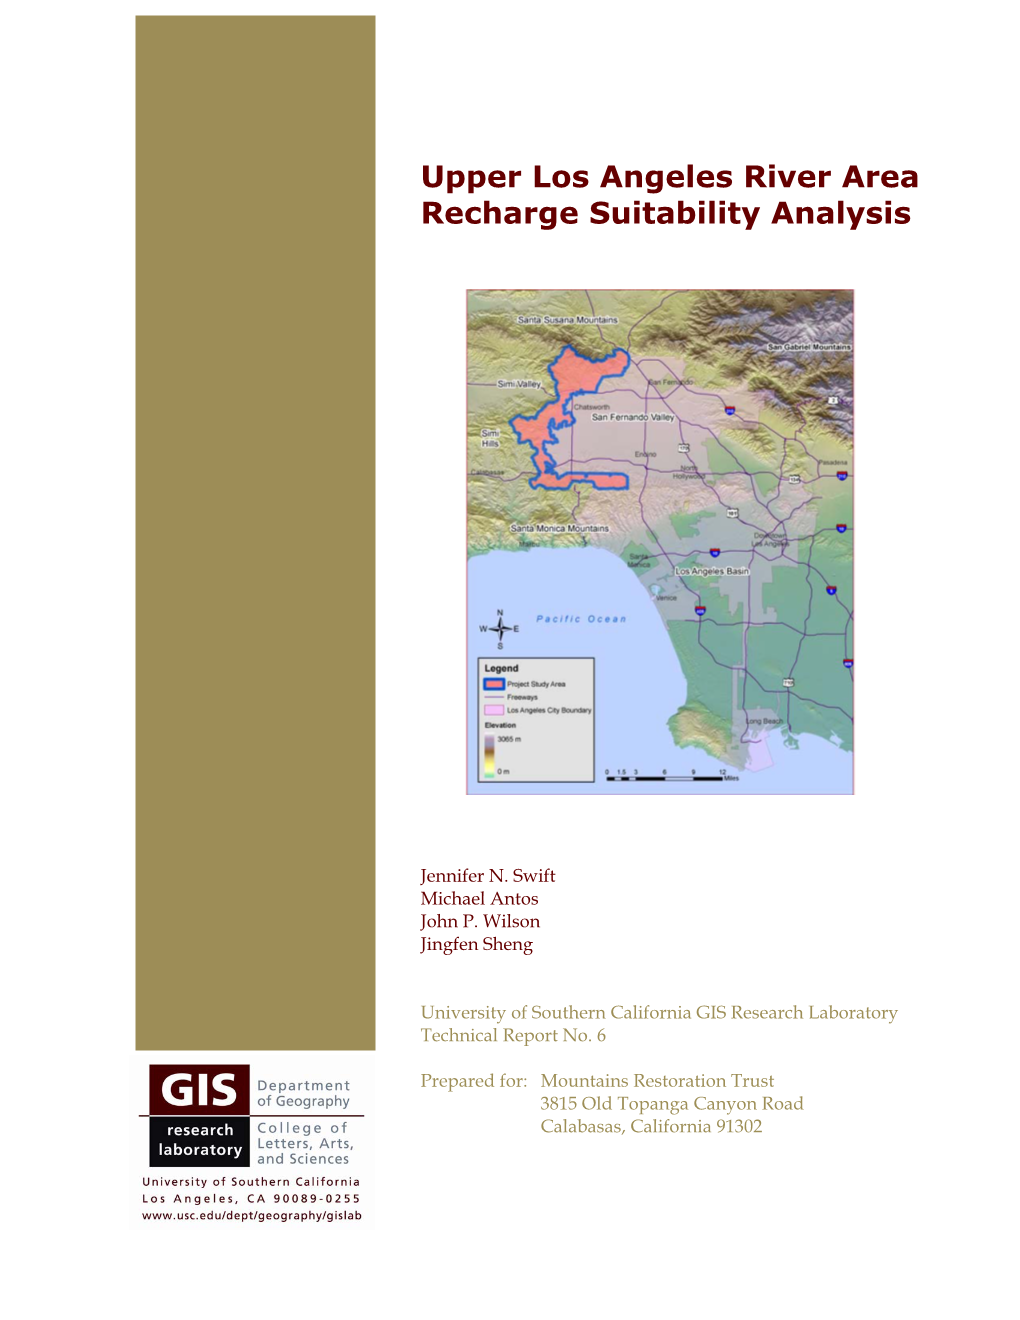 Upper Los Angeles River Area Recharge Suitability Analysis